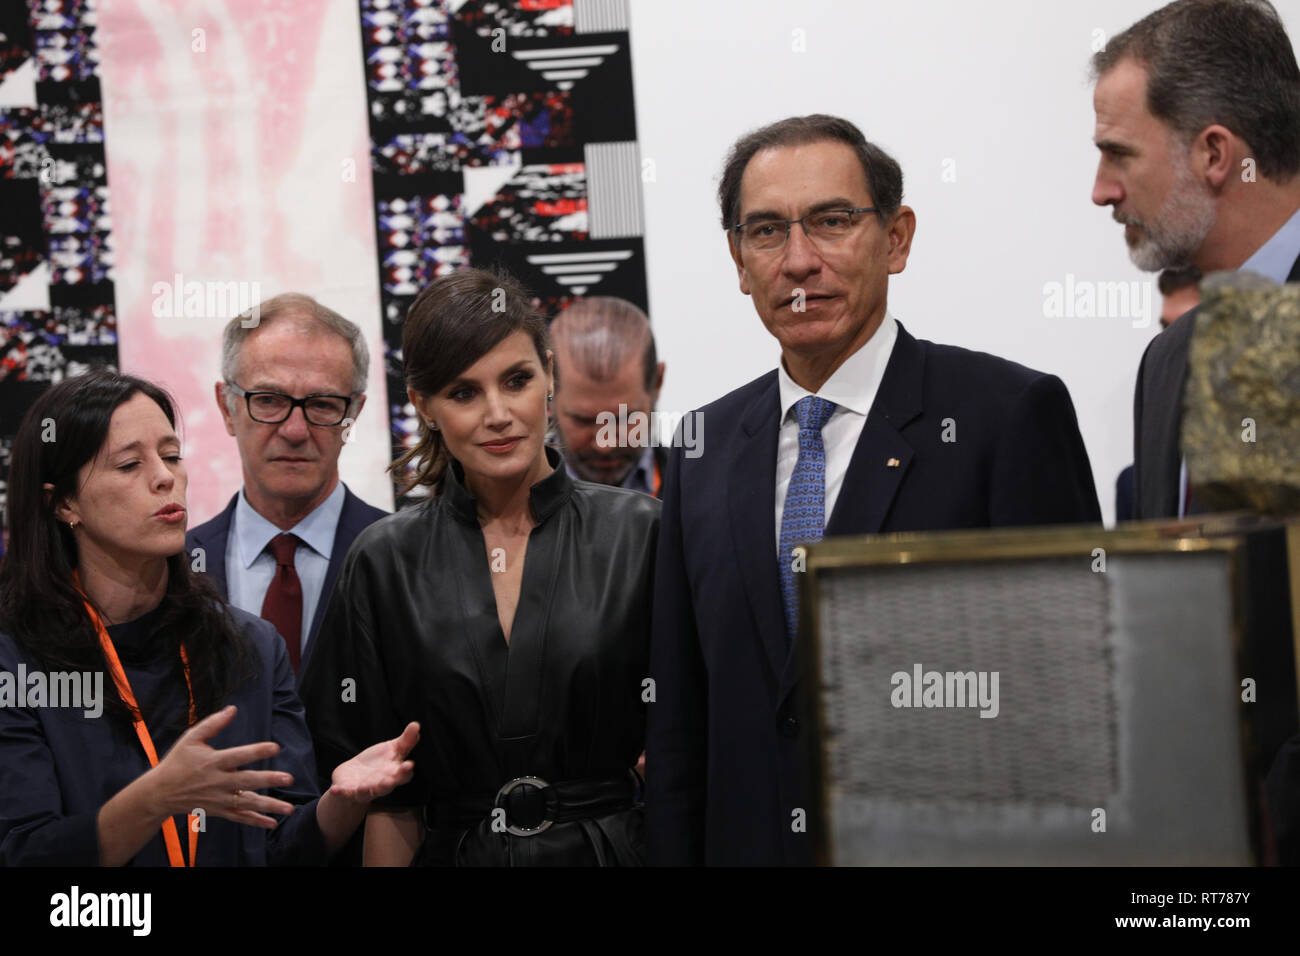 Madrid, Spain. 28th Feb, 2019. The Queen Letizia(L), the President of Peru Vizcarra and the King Felipe VI seen attending the explanations about a work of art of the stand Credit: Jesús Hellin/Alamy Live News Stock Photo